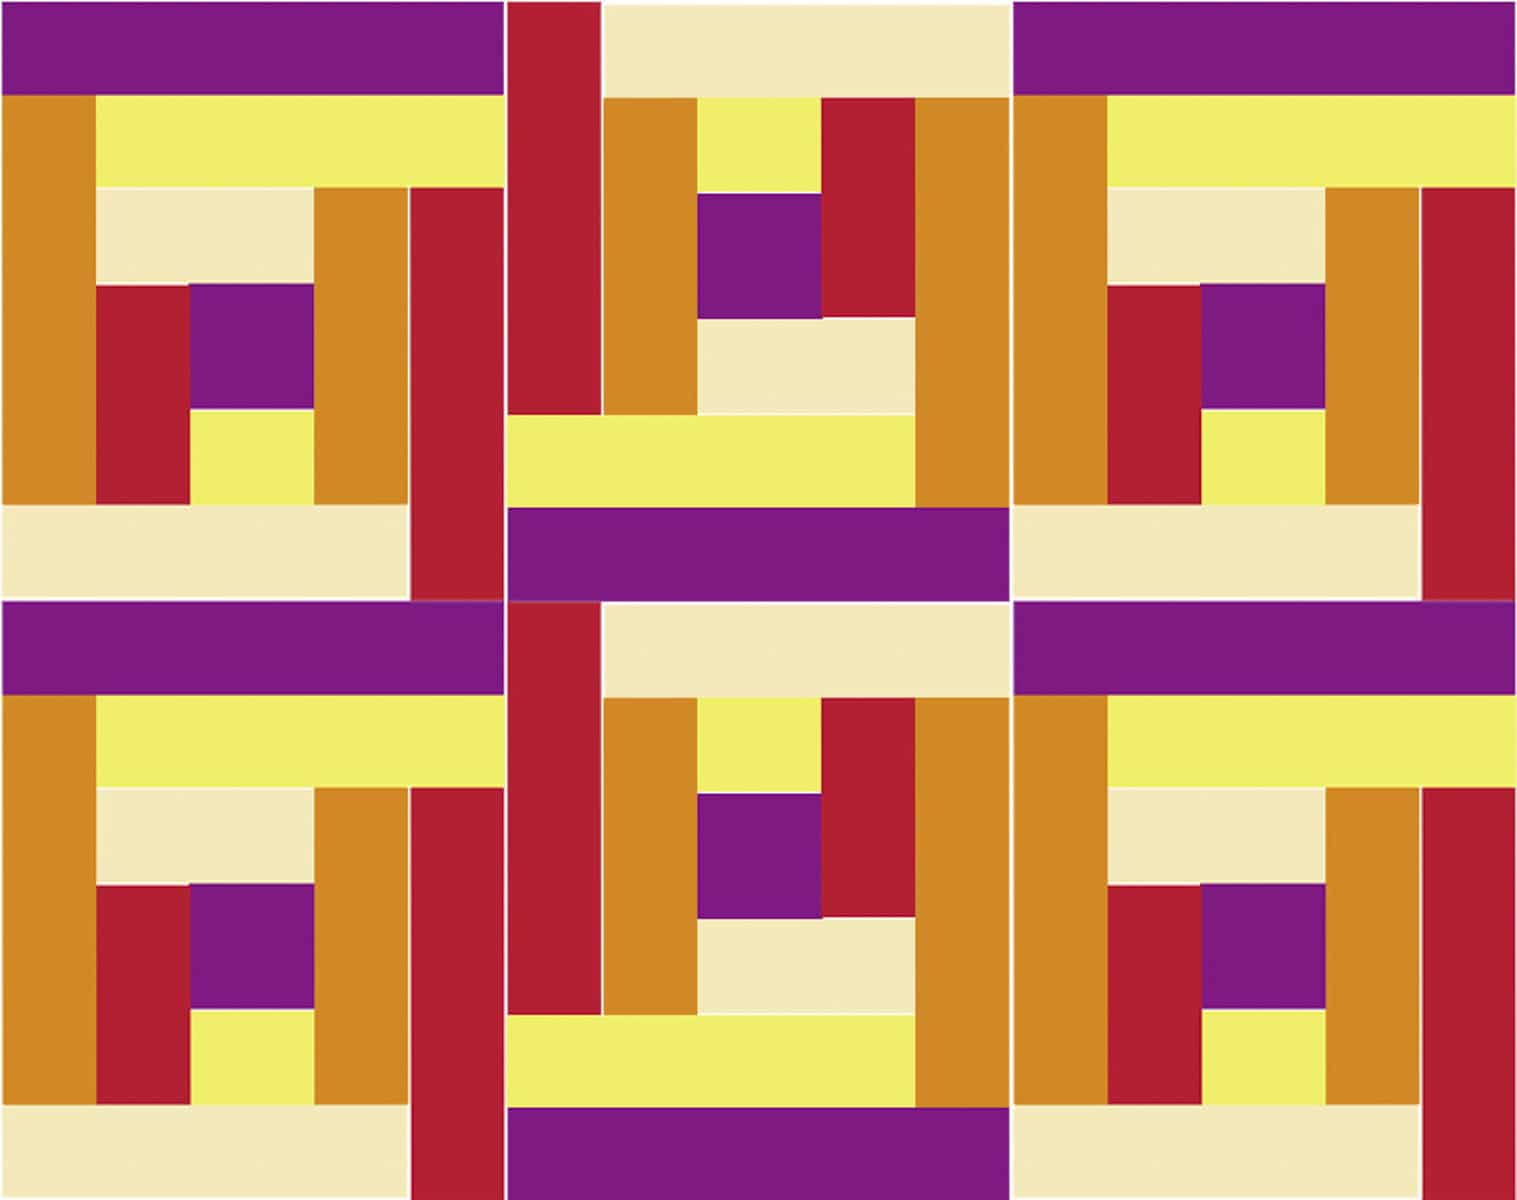 A multi-colored array of rectangles arranged in a repeating, but rotated pattern. The pattern repeats three wide, and two high.